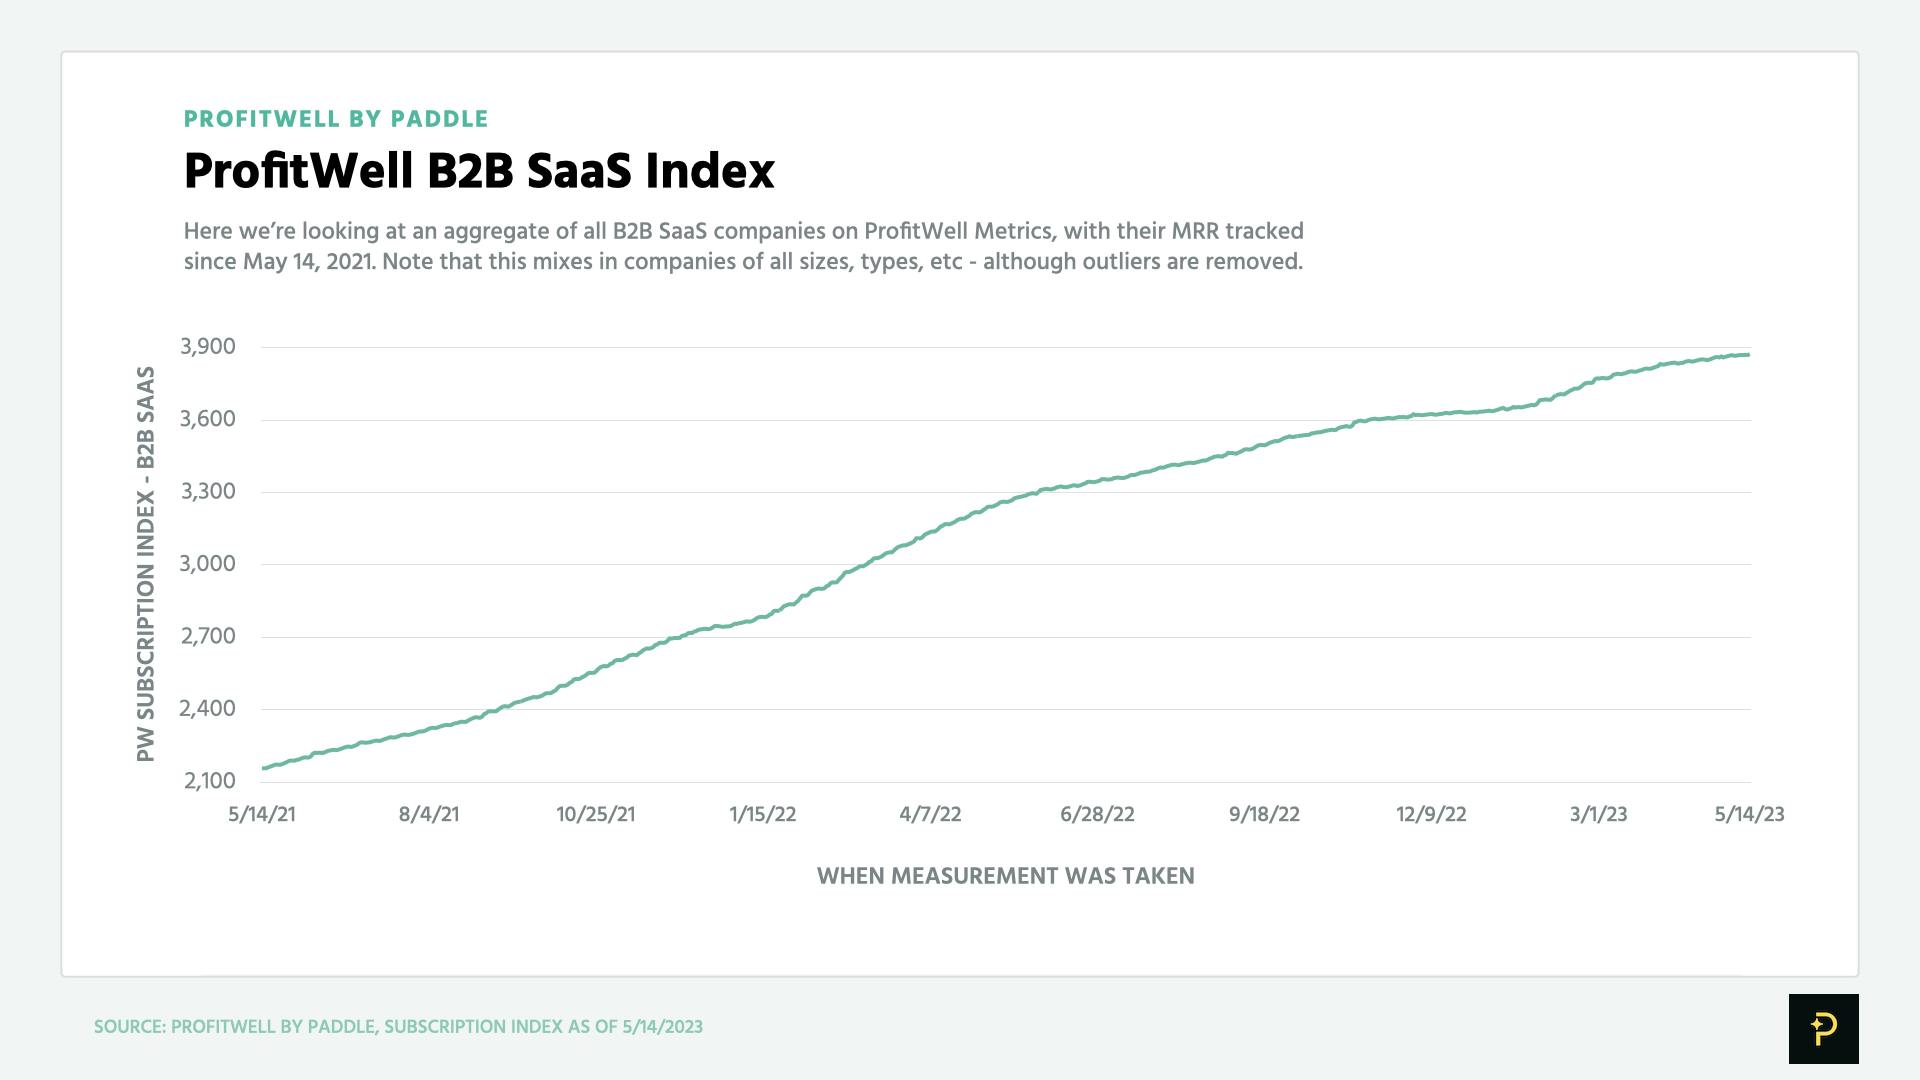 Chart of the ProfitWell B2B SaaS Index up to May 2023, showing growth slowing.